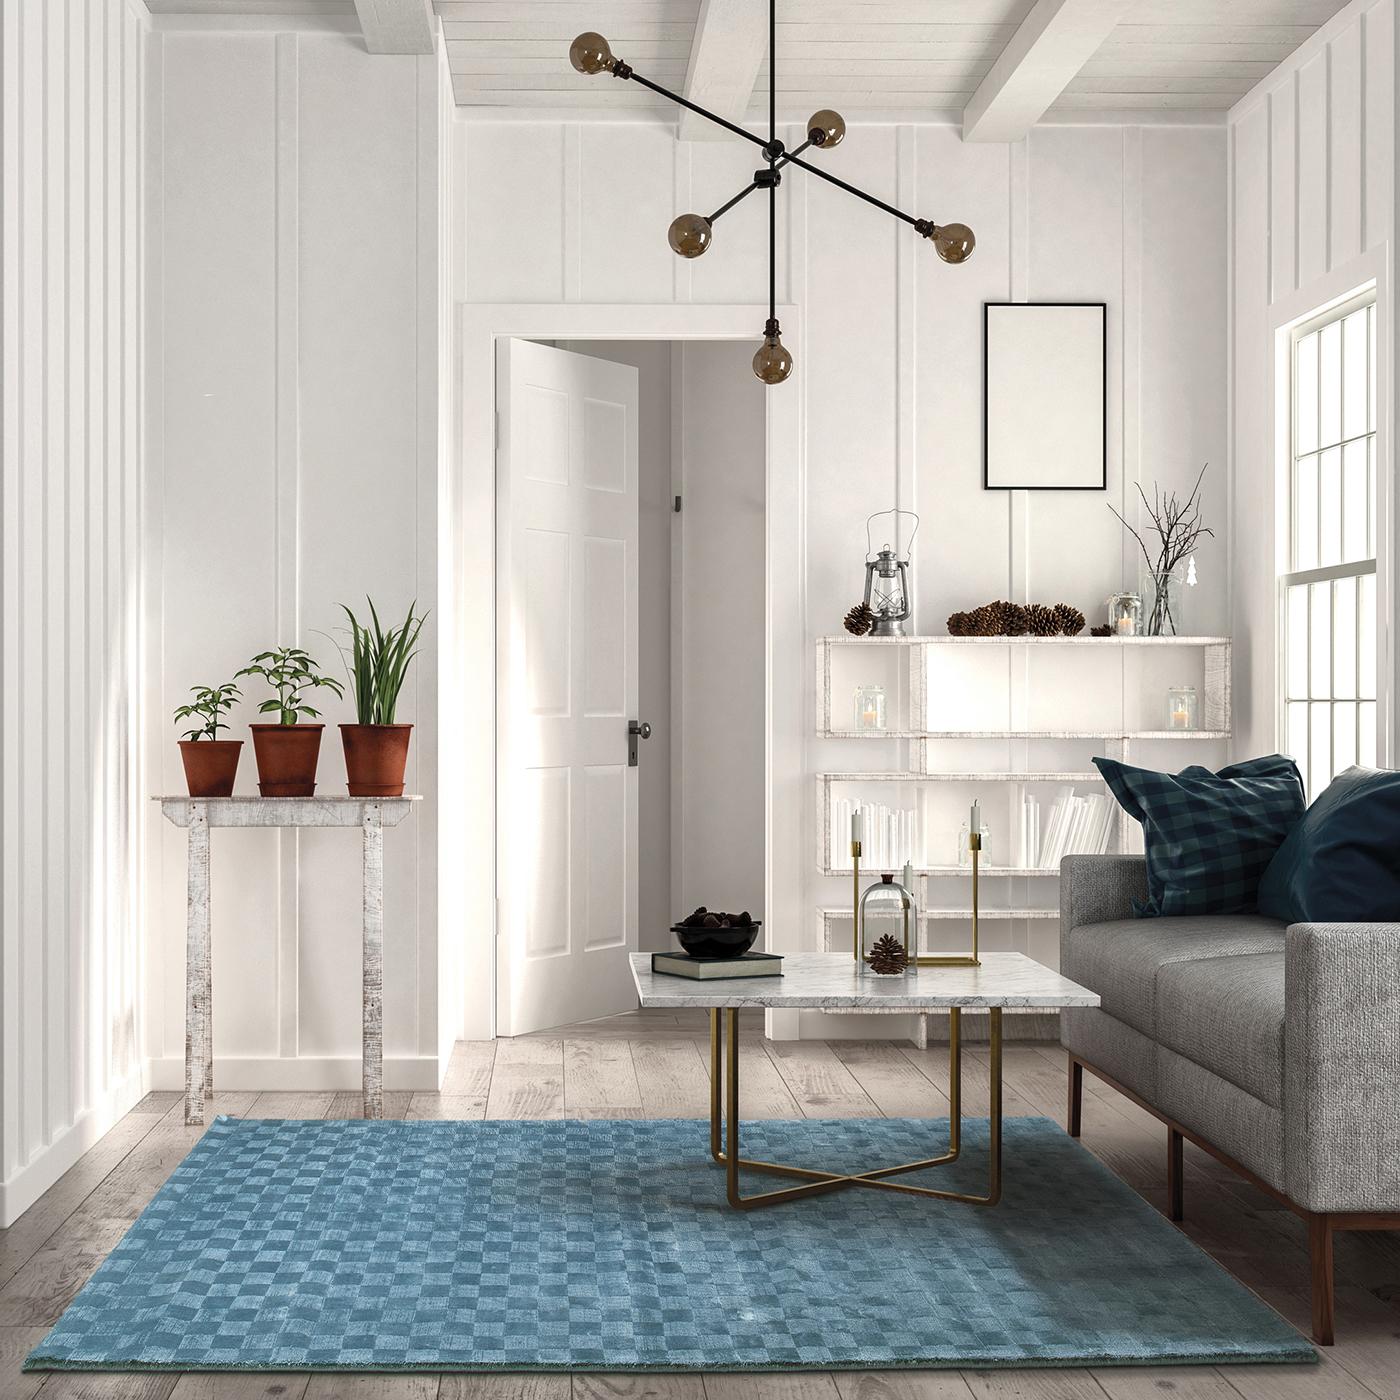 Damier Ocean is a geometric handloom rug that focuses on simplicity. It is enhanced through the use of elegant yarns, the cut and loop technique, and the Ocean color palette, which reflects the trend towards natural colors of the land and sea. Its